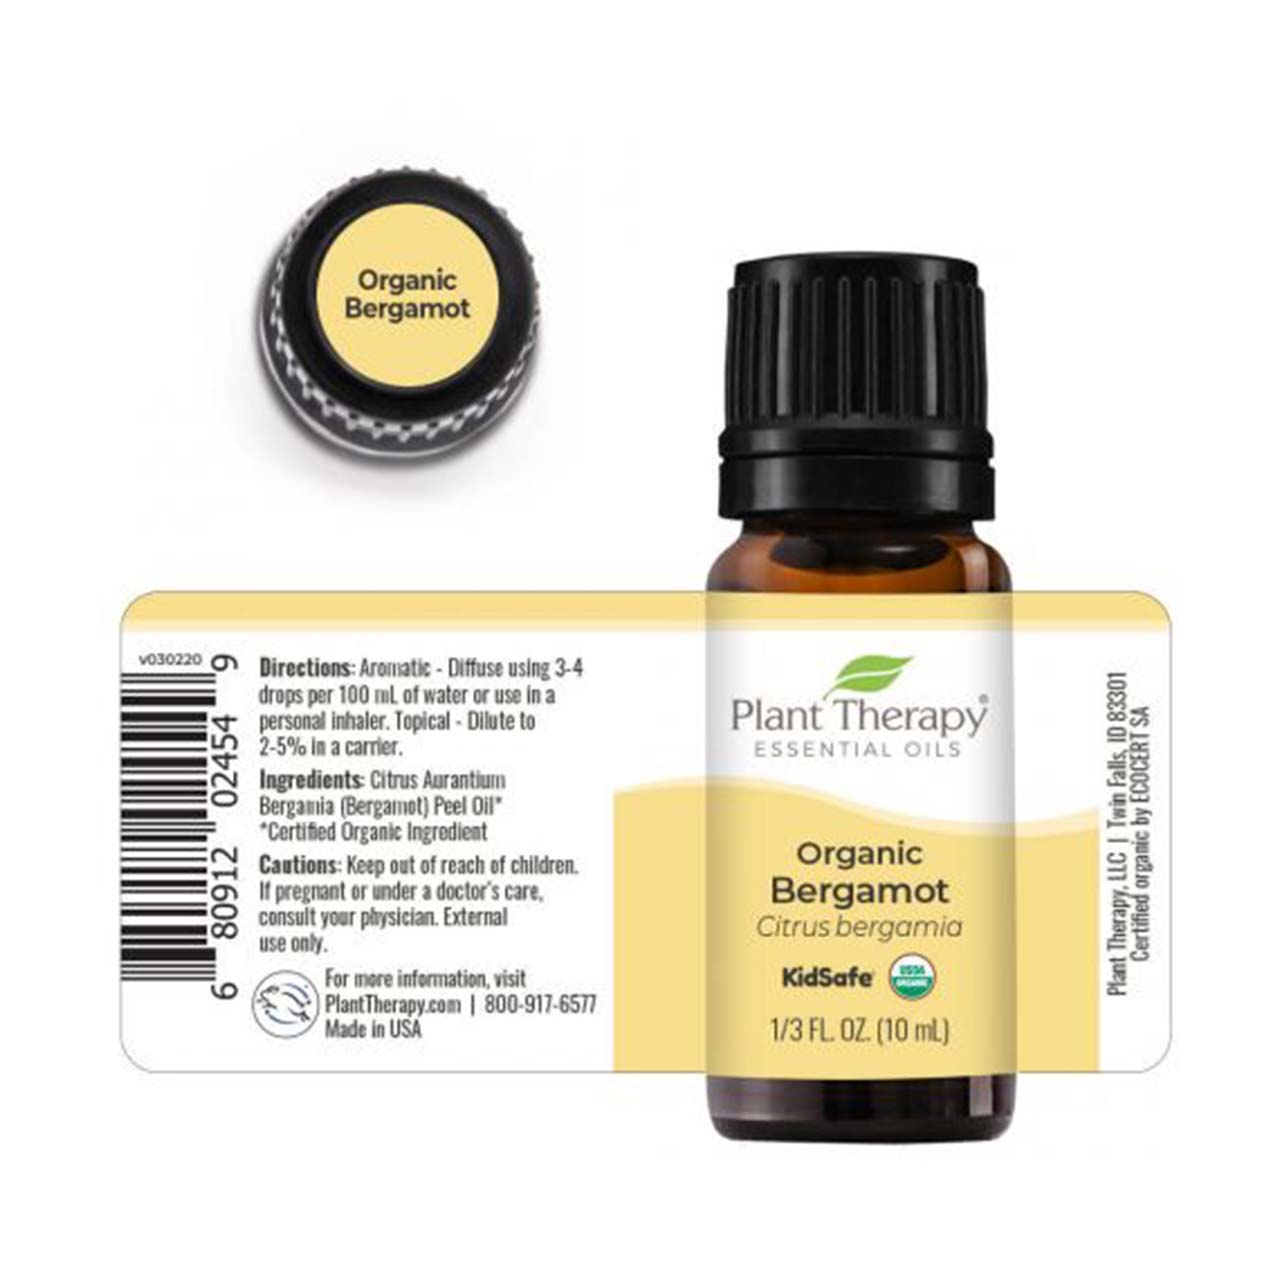 Organic Bergamot essential oil, KidSafe, USDA Organic. Made in USA. 10ml glass jar. Made by Plant Therapy. Shown with back label and ingredient information.